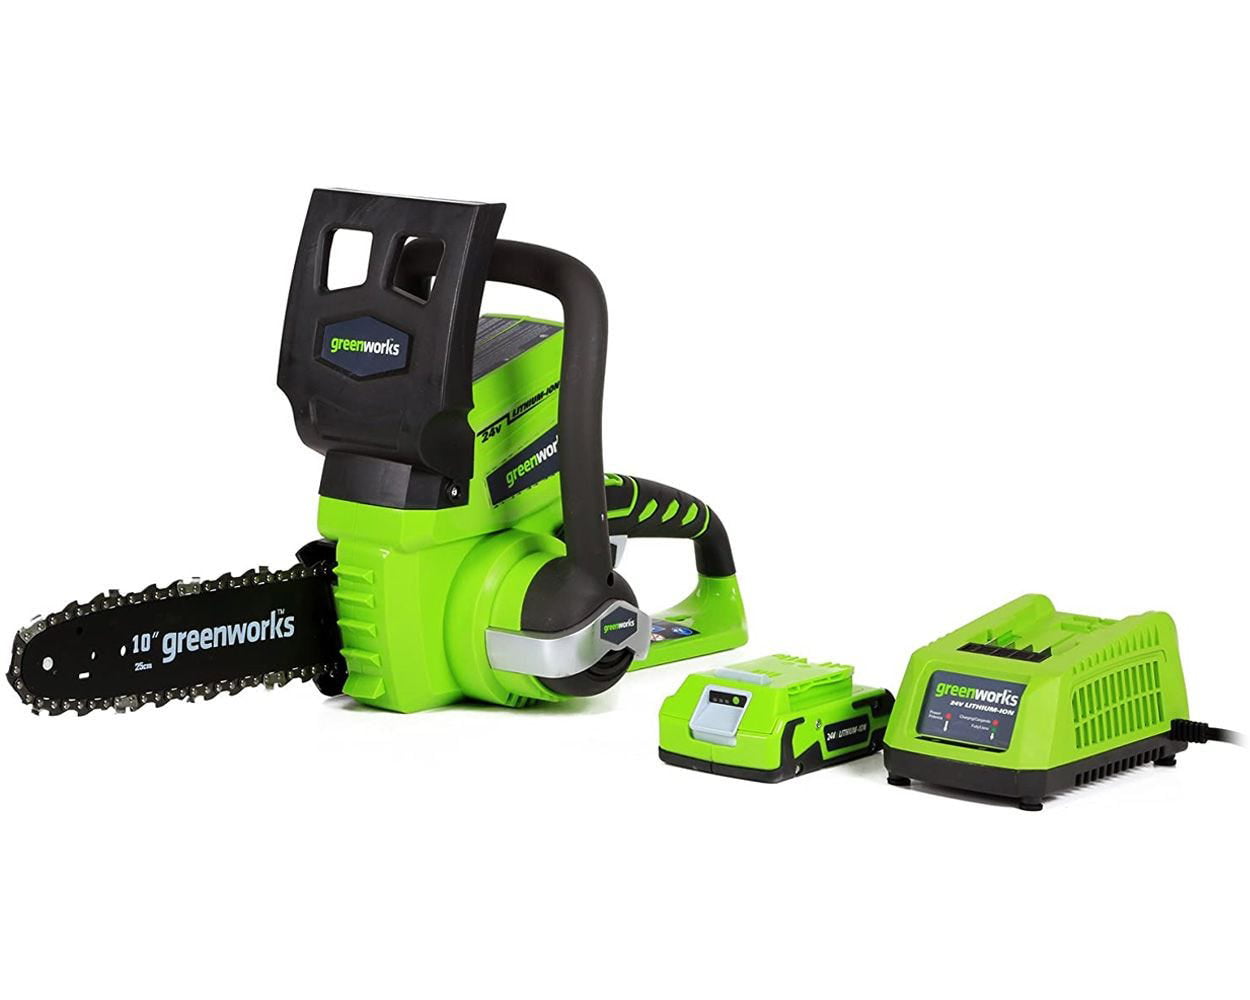 Greenworks 10" 24 Volt Cordless Chainsaw w/ 2.0 Ah Battery & Charger $84.35 + Free Shipping